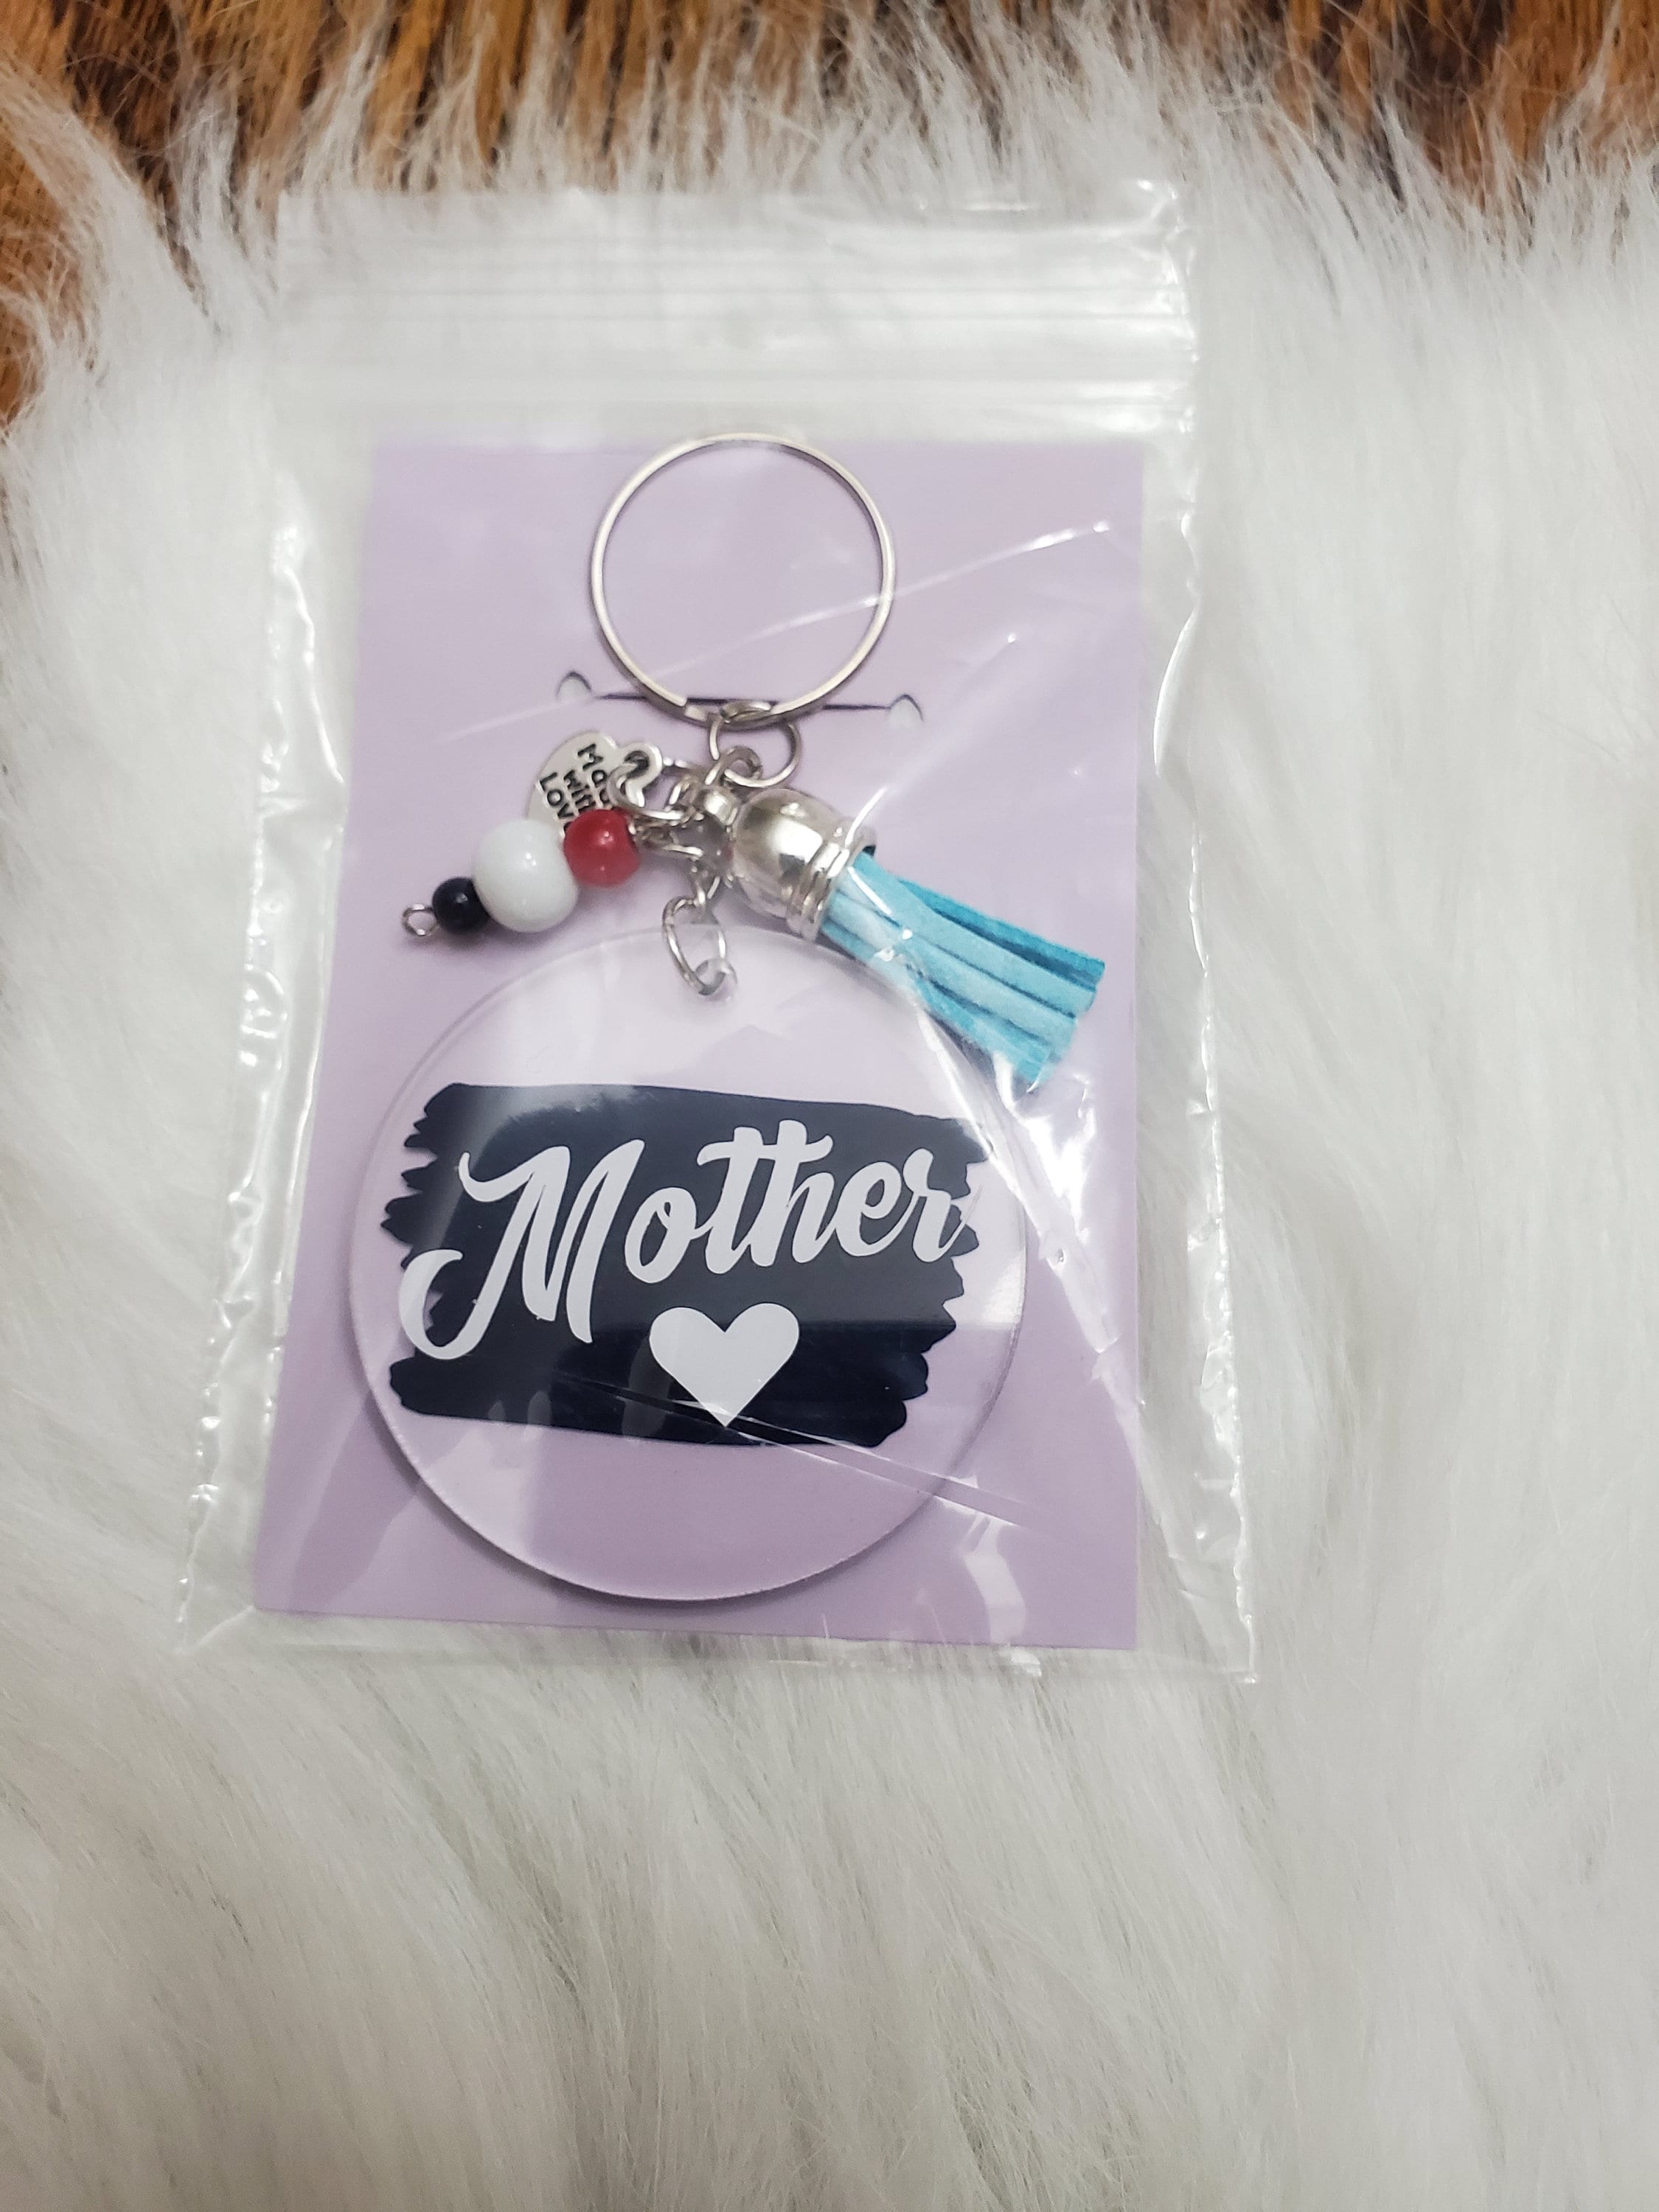 Boy Mom' Mother's Day Themed Keychains With Tassels – Christina's Creations  / CB